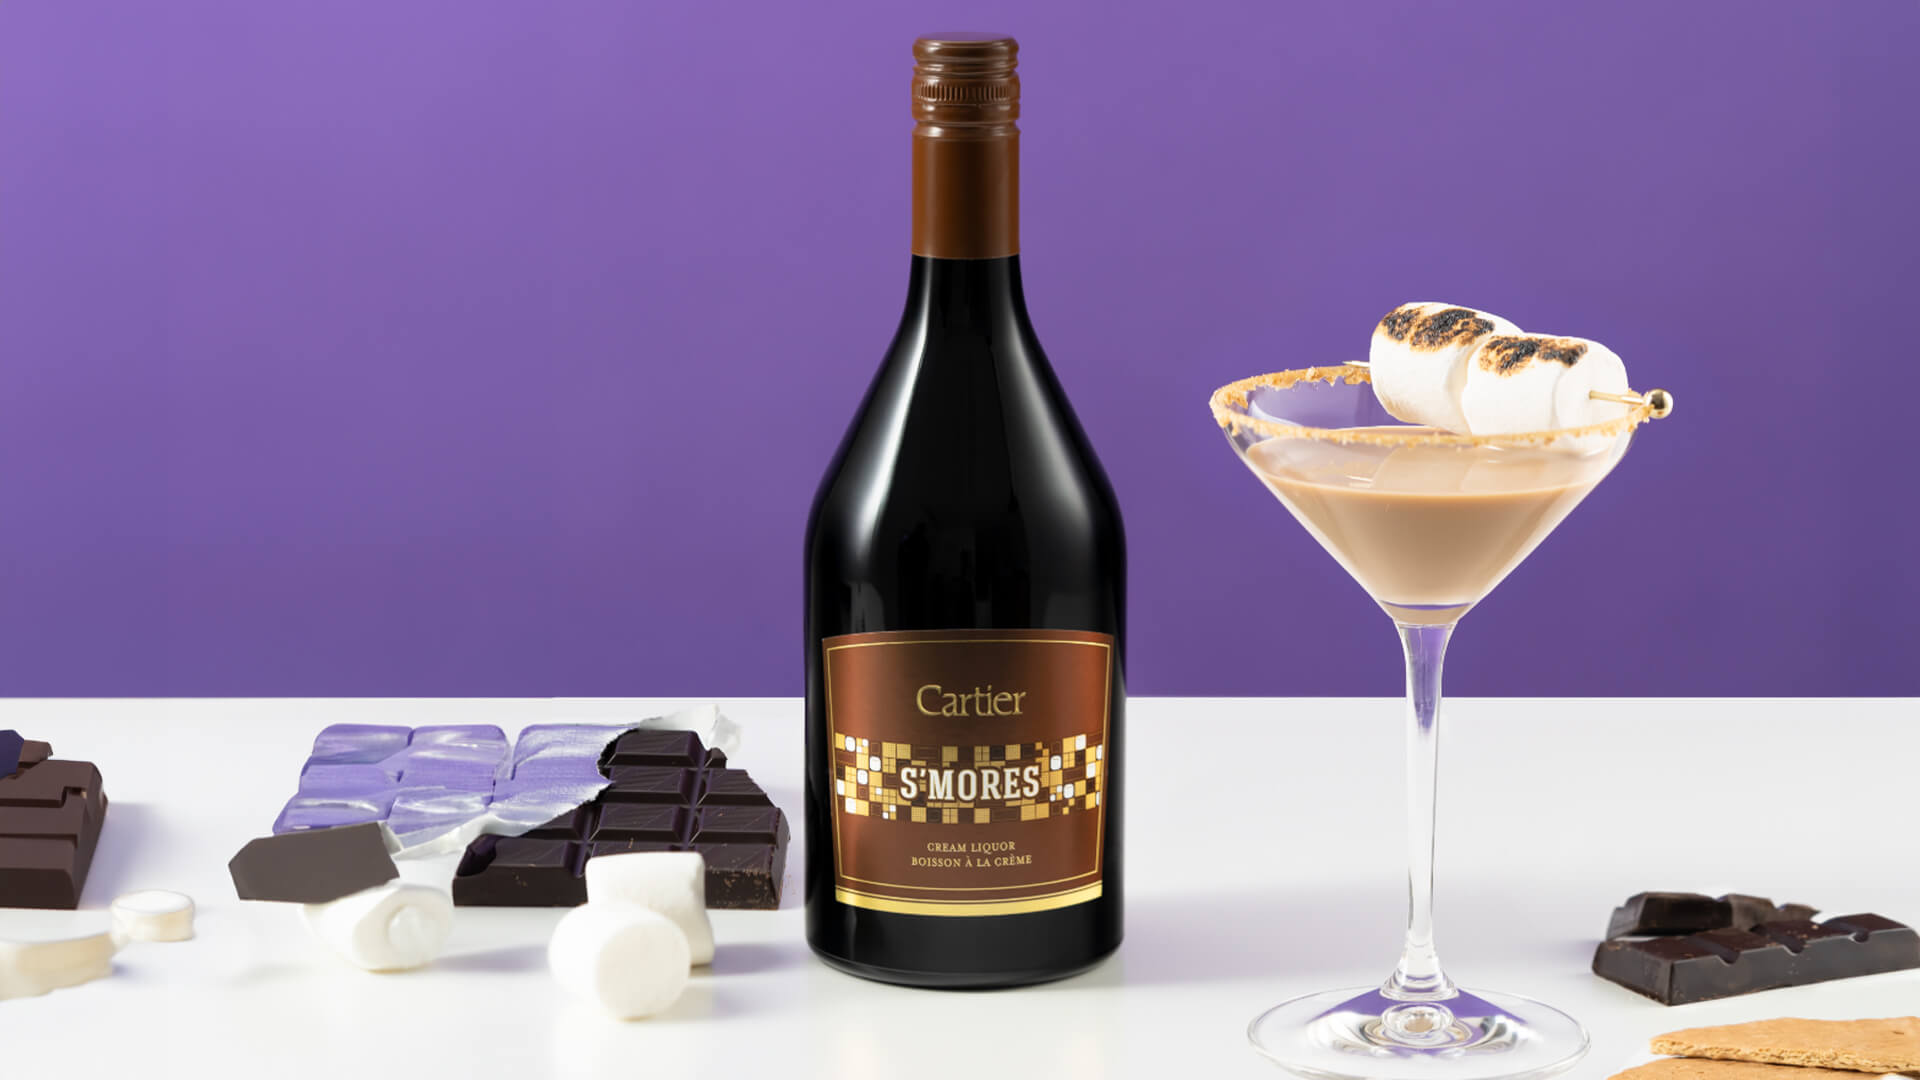 A bottle of Cartier S'mores with a cocktail.